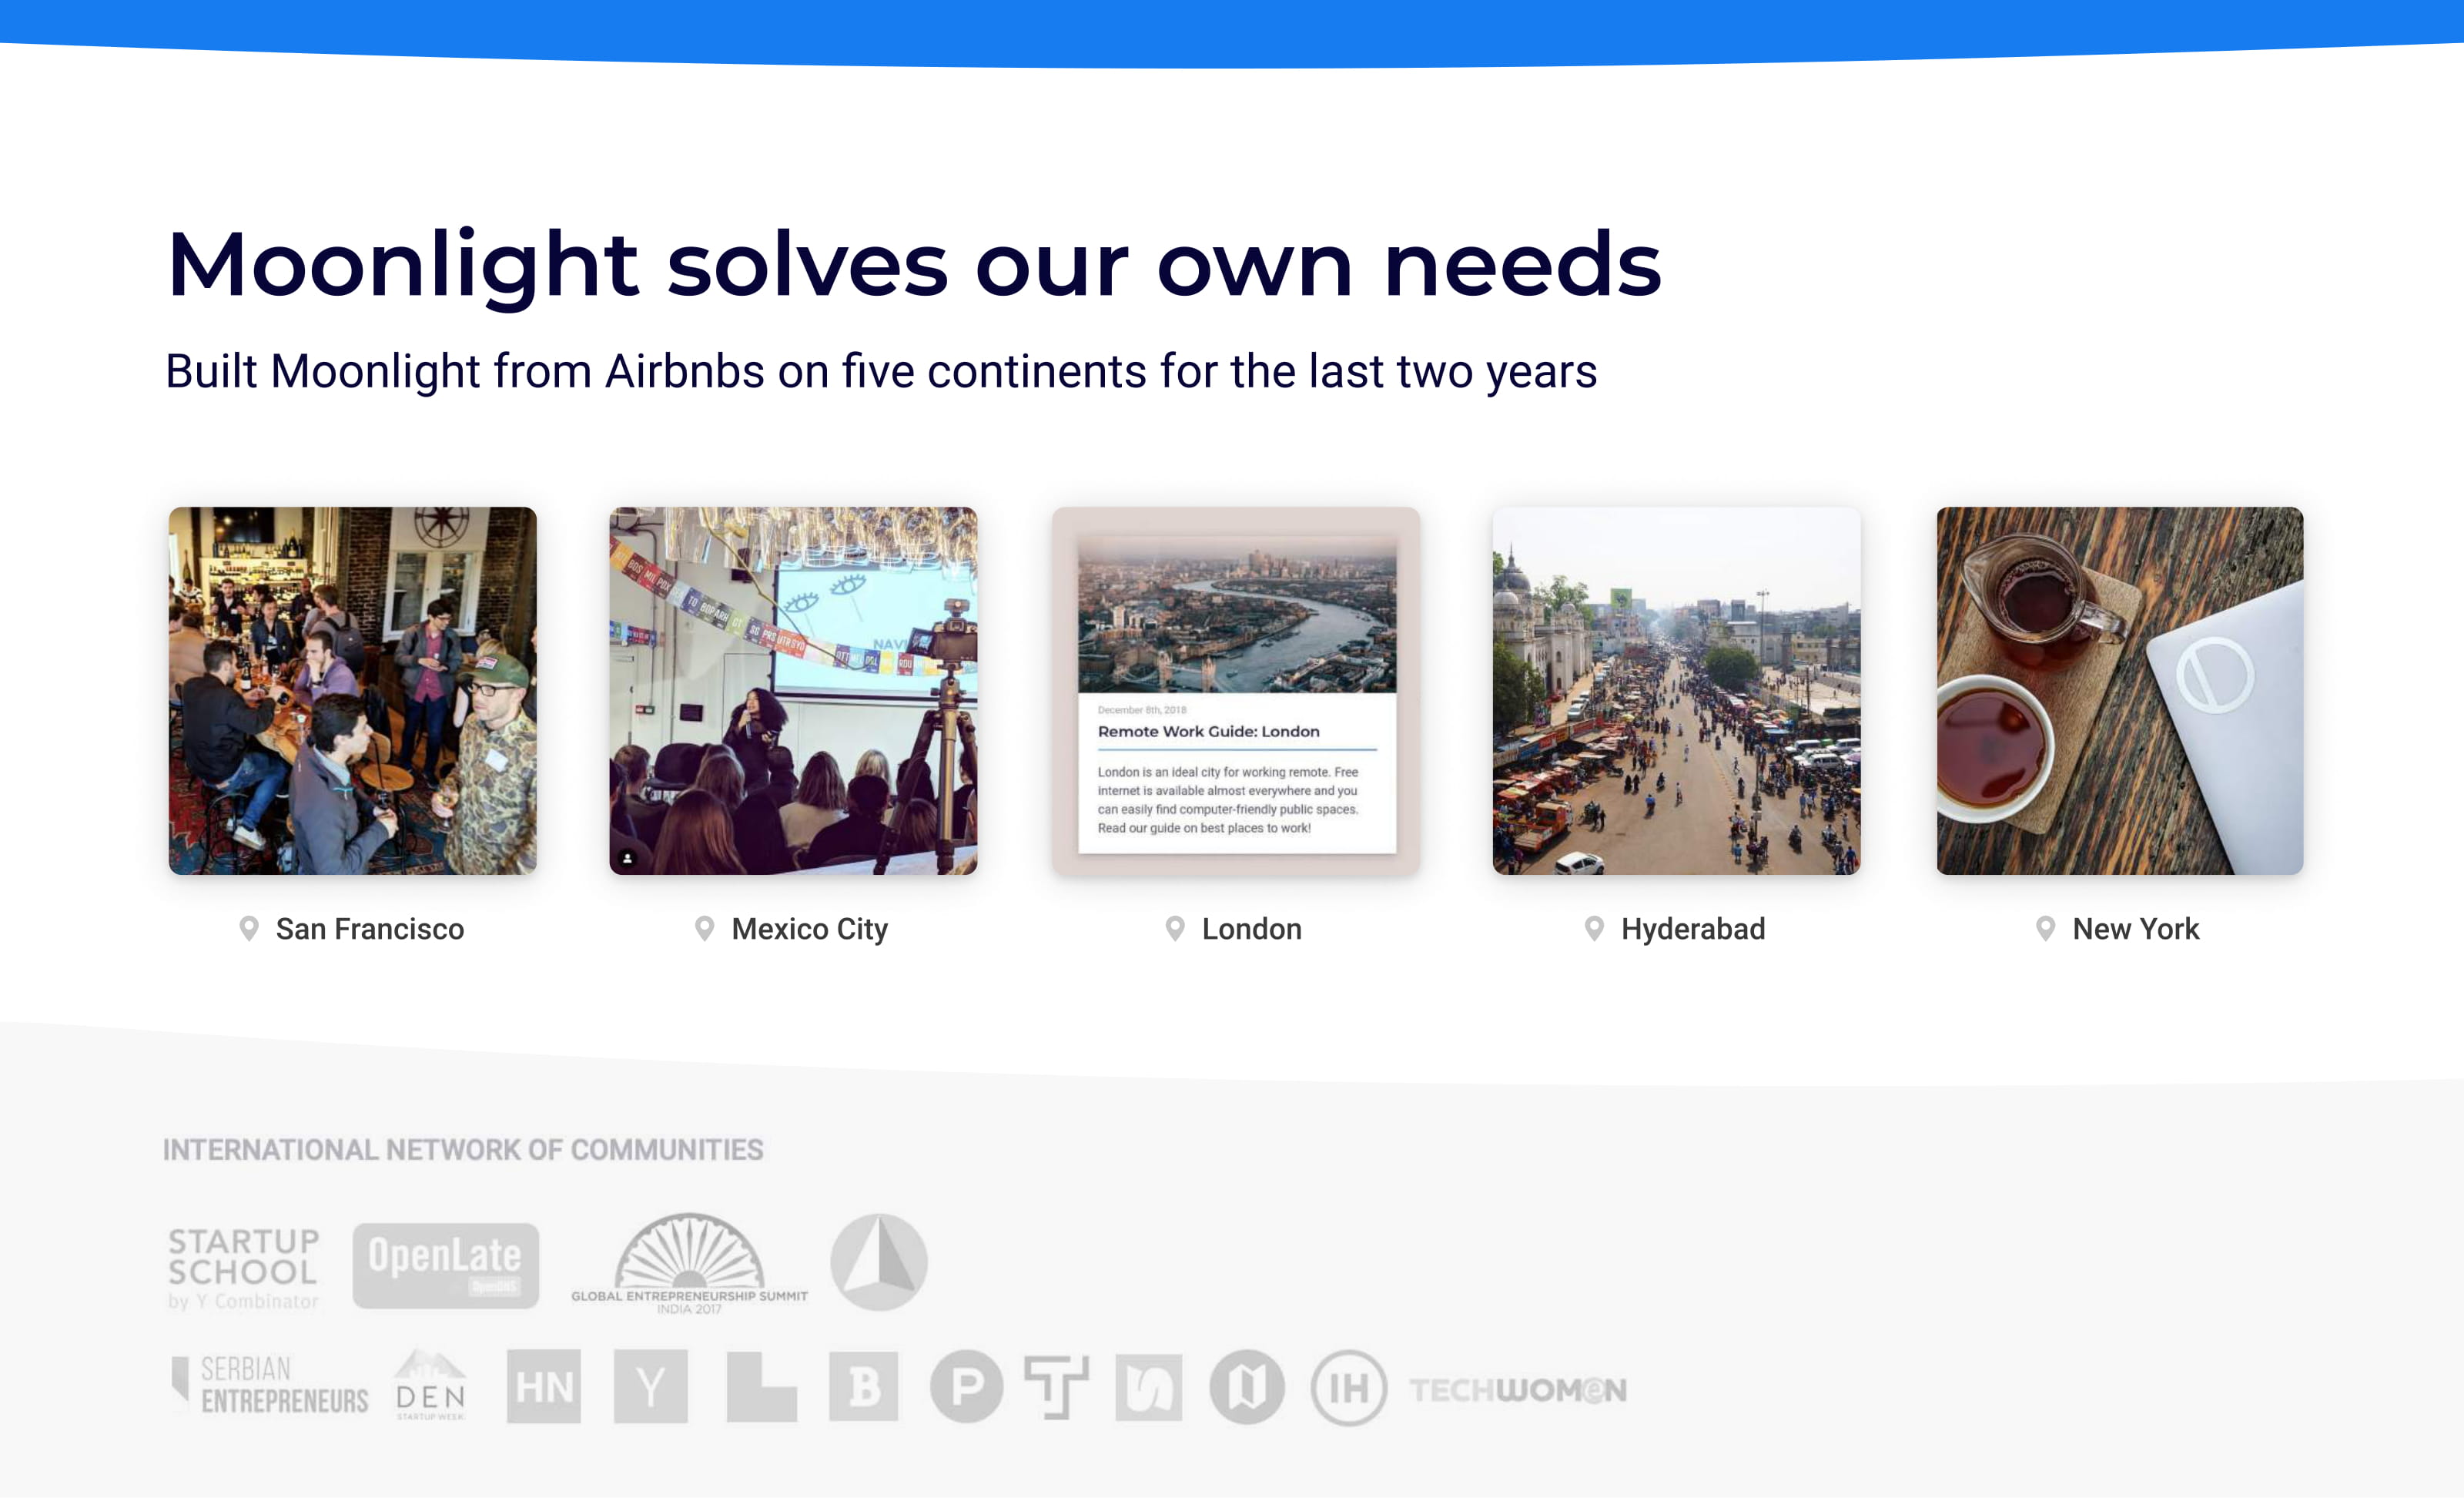 Moonlight pitch deck - building Moonlight to solve our own needs